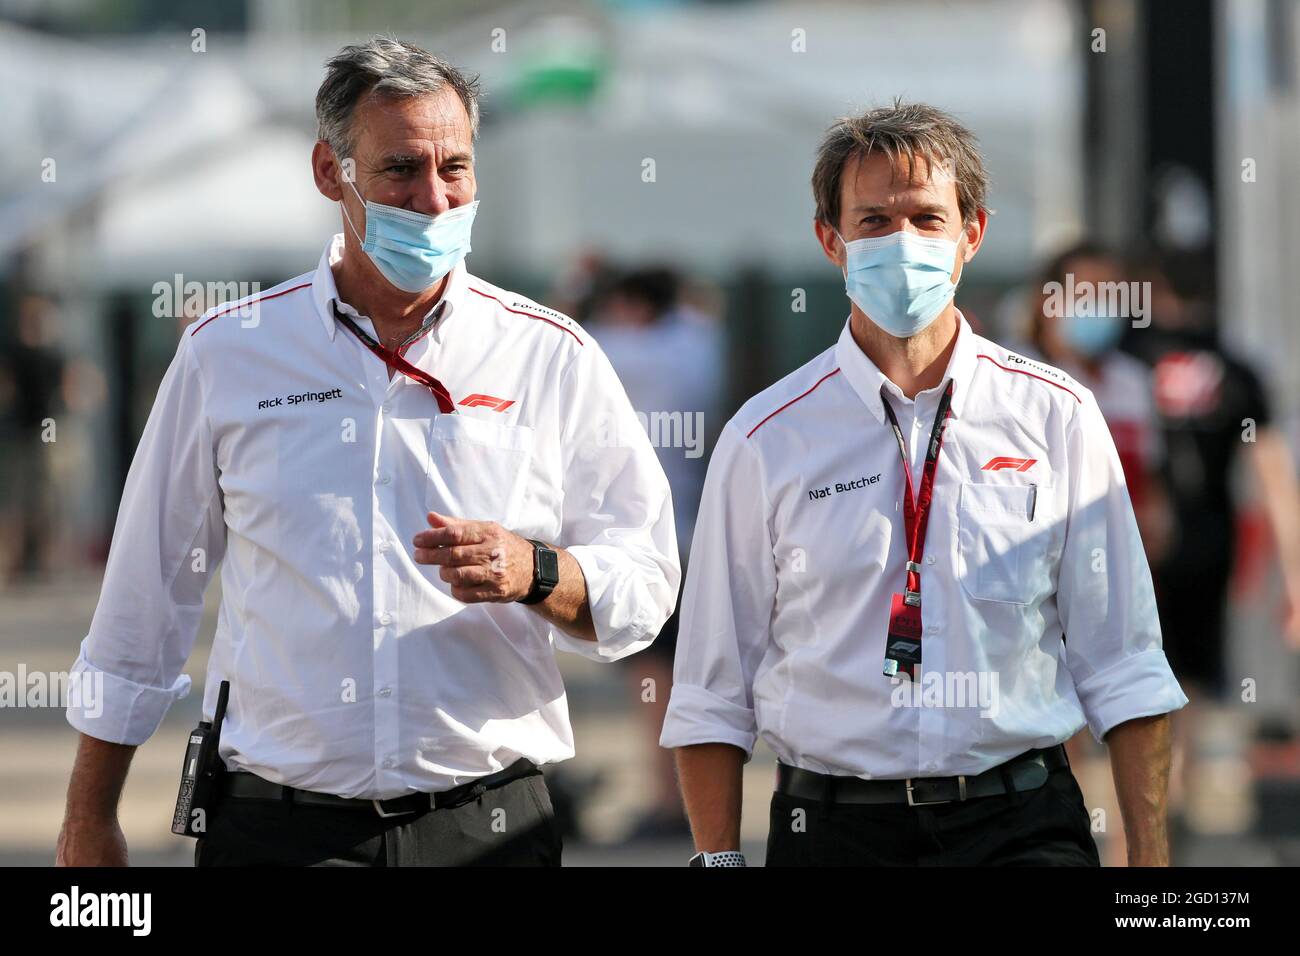 (L to R): Richard Springett (GBR) F1 Circuit Engineer Team Manager and Nat Butcher (GBR) F1 Senior Circuit Engineer. Tuscan Grand Prix, Friday 11th September 2020. Mugello Italy. Stock Photo